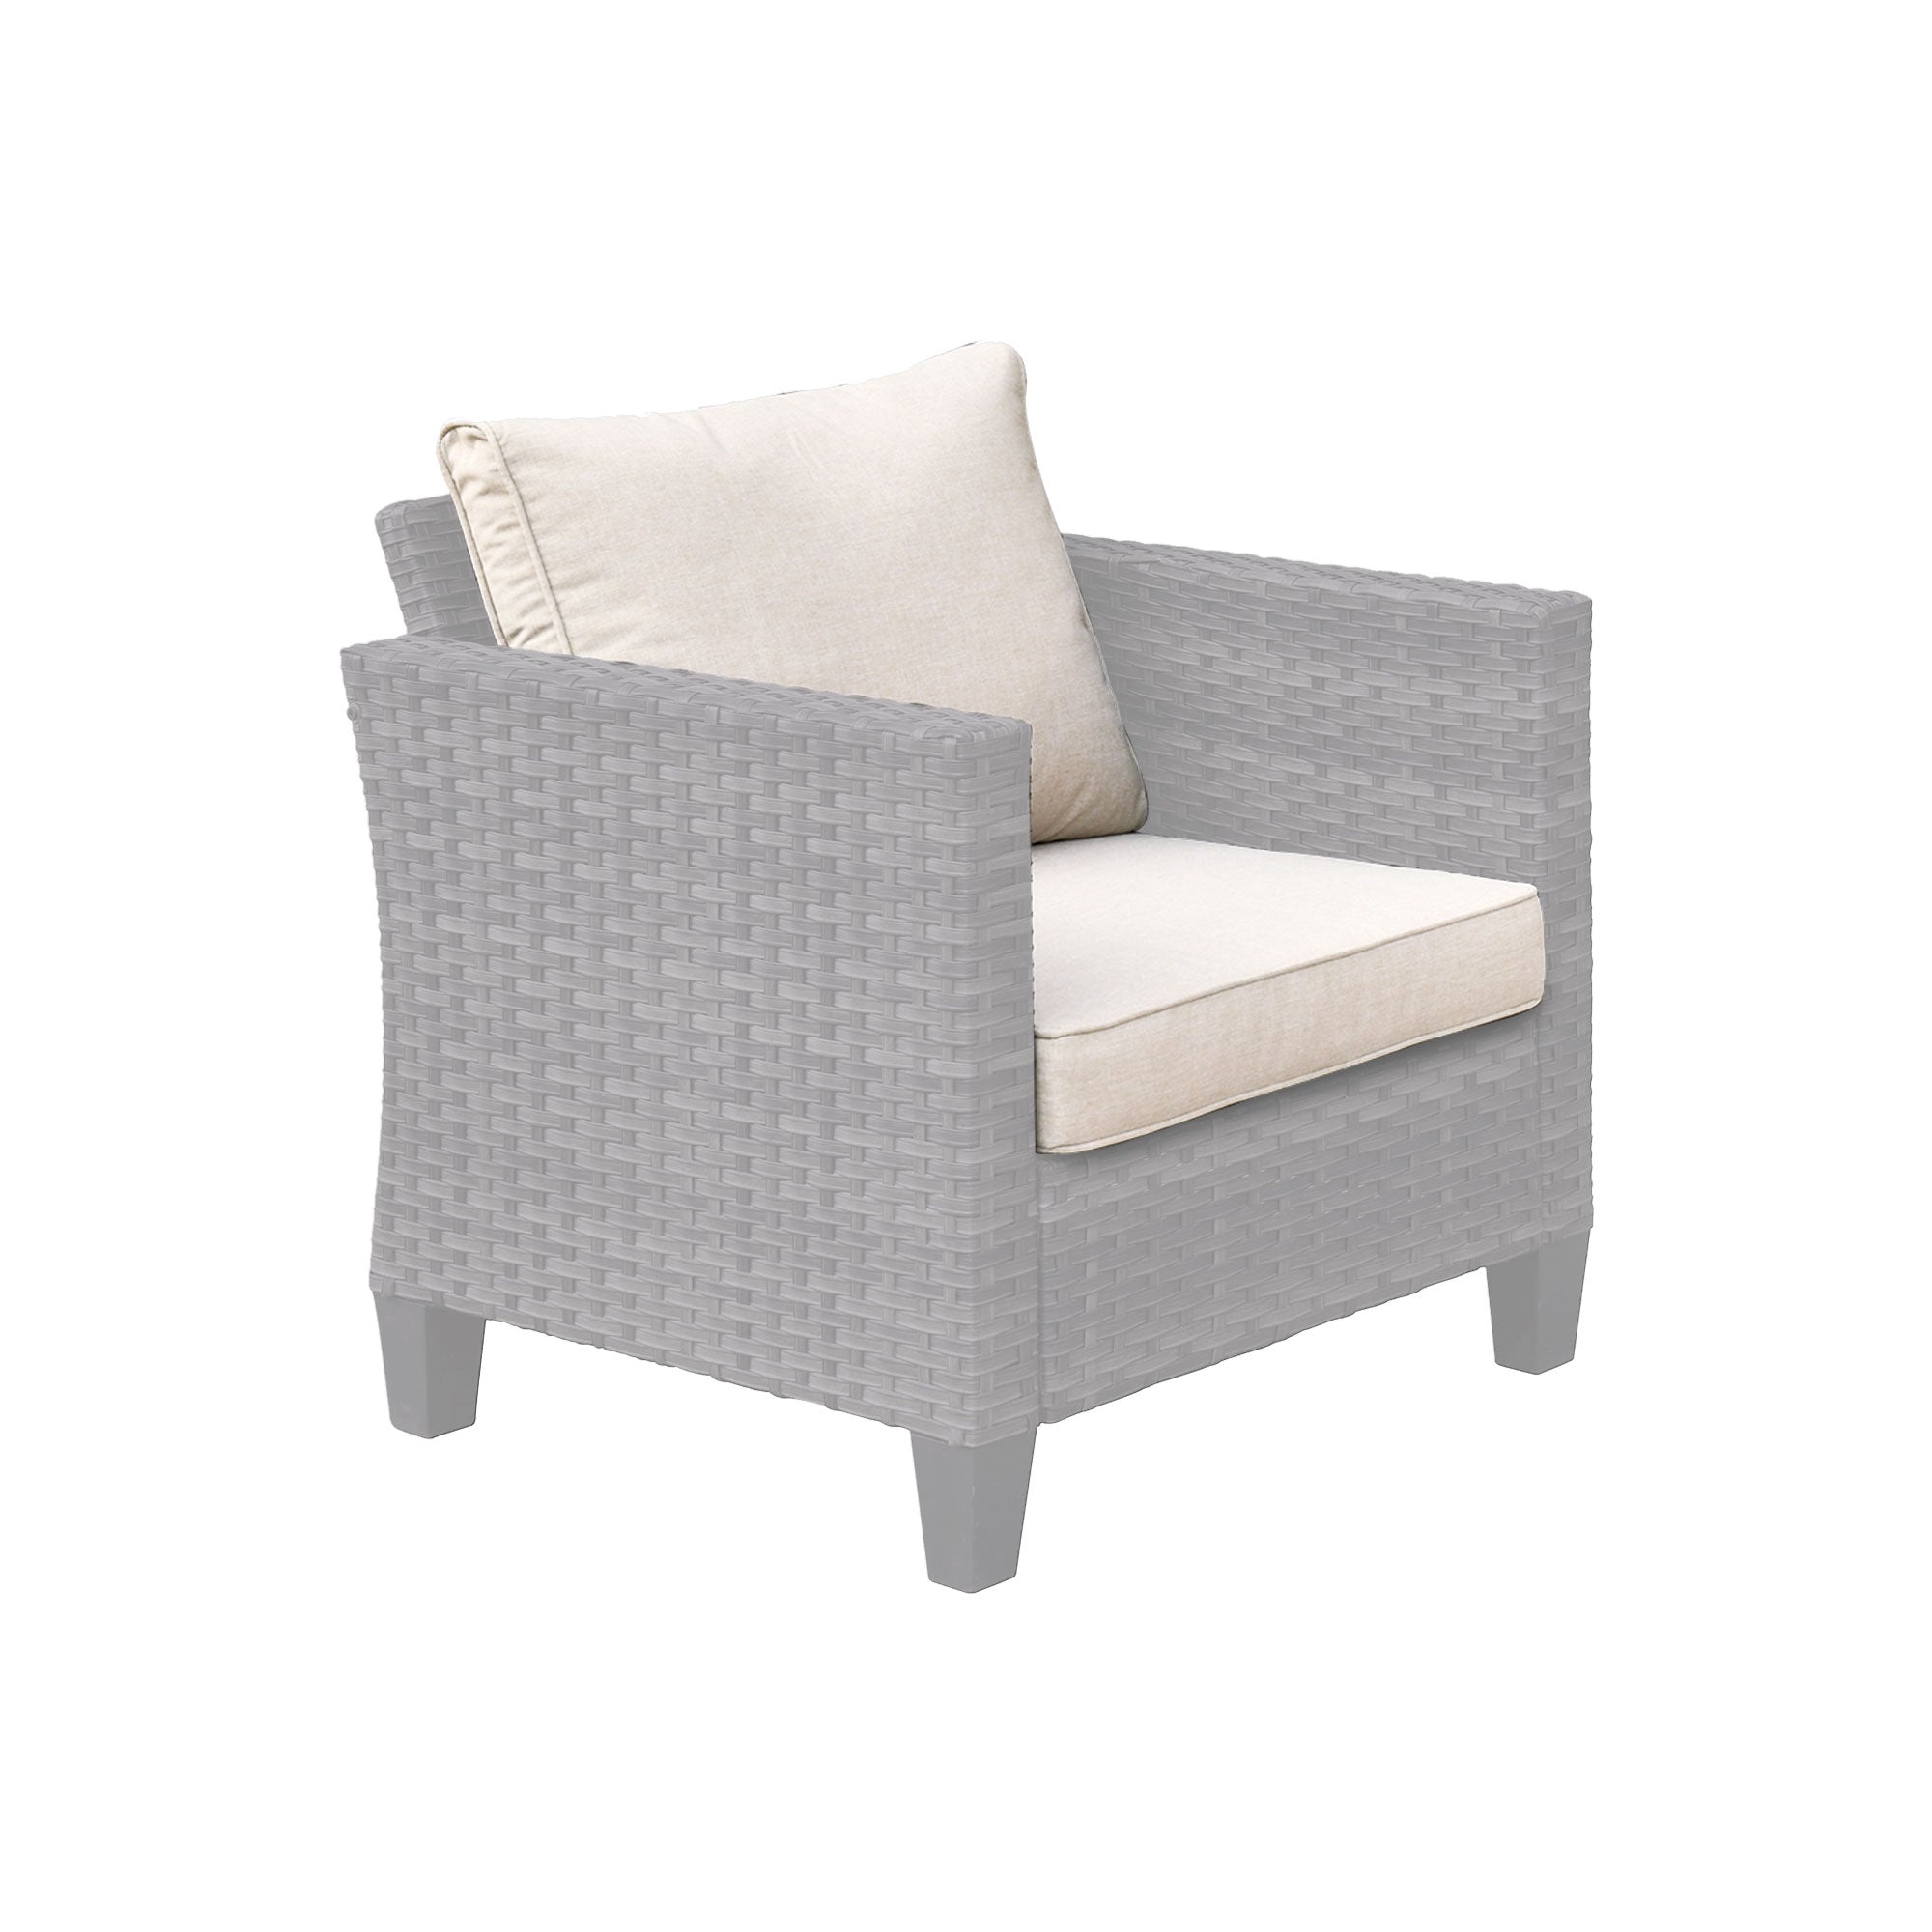 #Color_Beige|#Type_Chair/Loveseat:Seat+Back Cushion